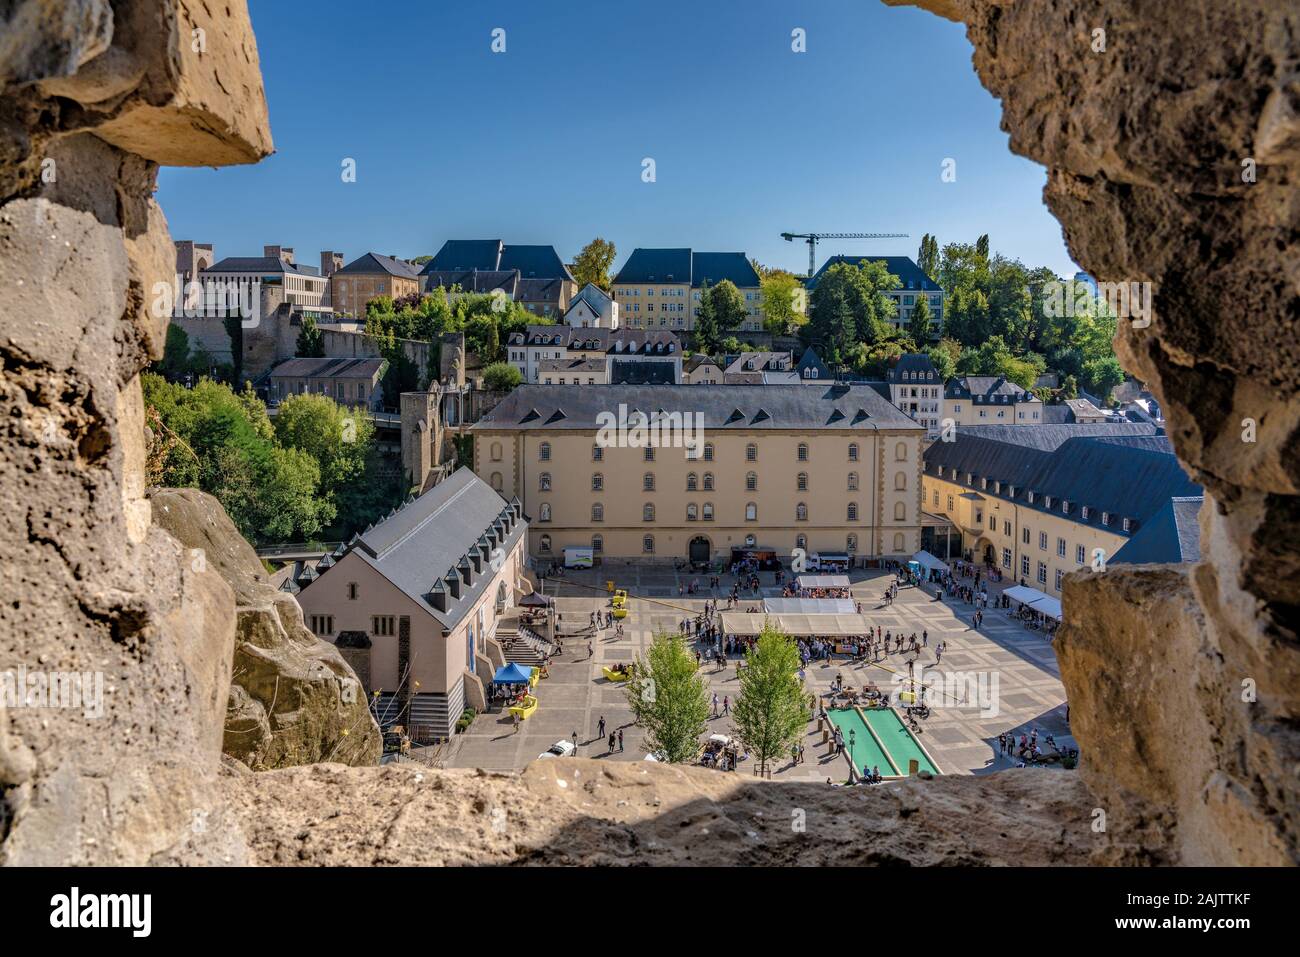 LUXEMBOURG CITY, LUXEMBOURG - SEPTEMBER 21: This is a view of the town square at Notre Dam Cathedral and the historical old quarter of Ville Haute on Stock Photo